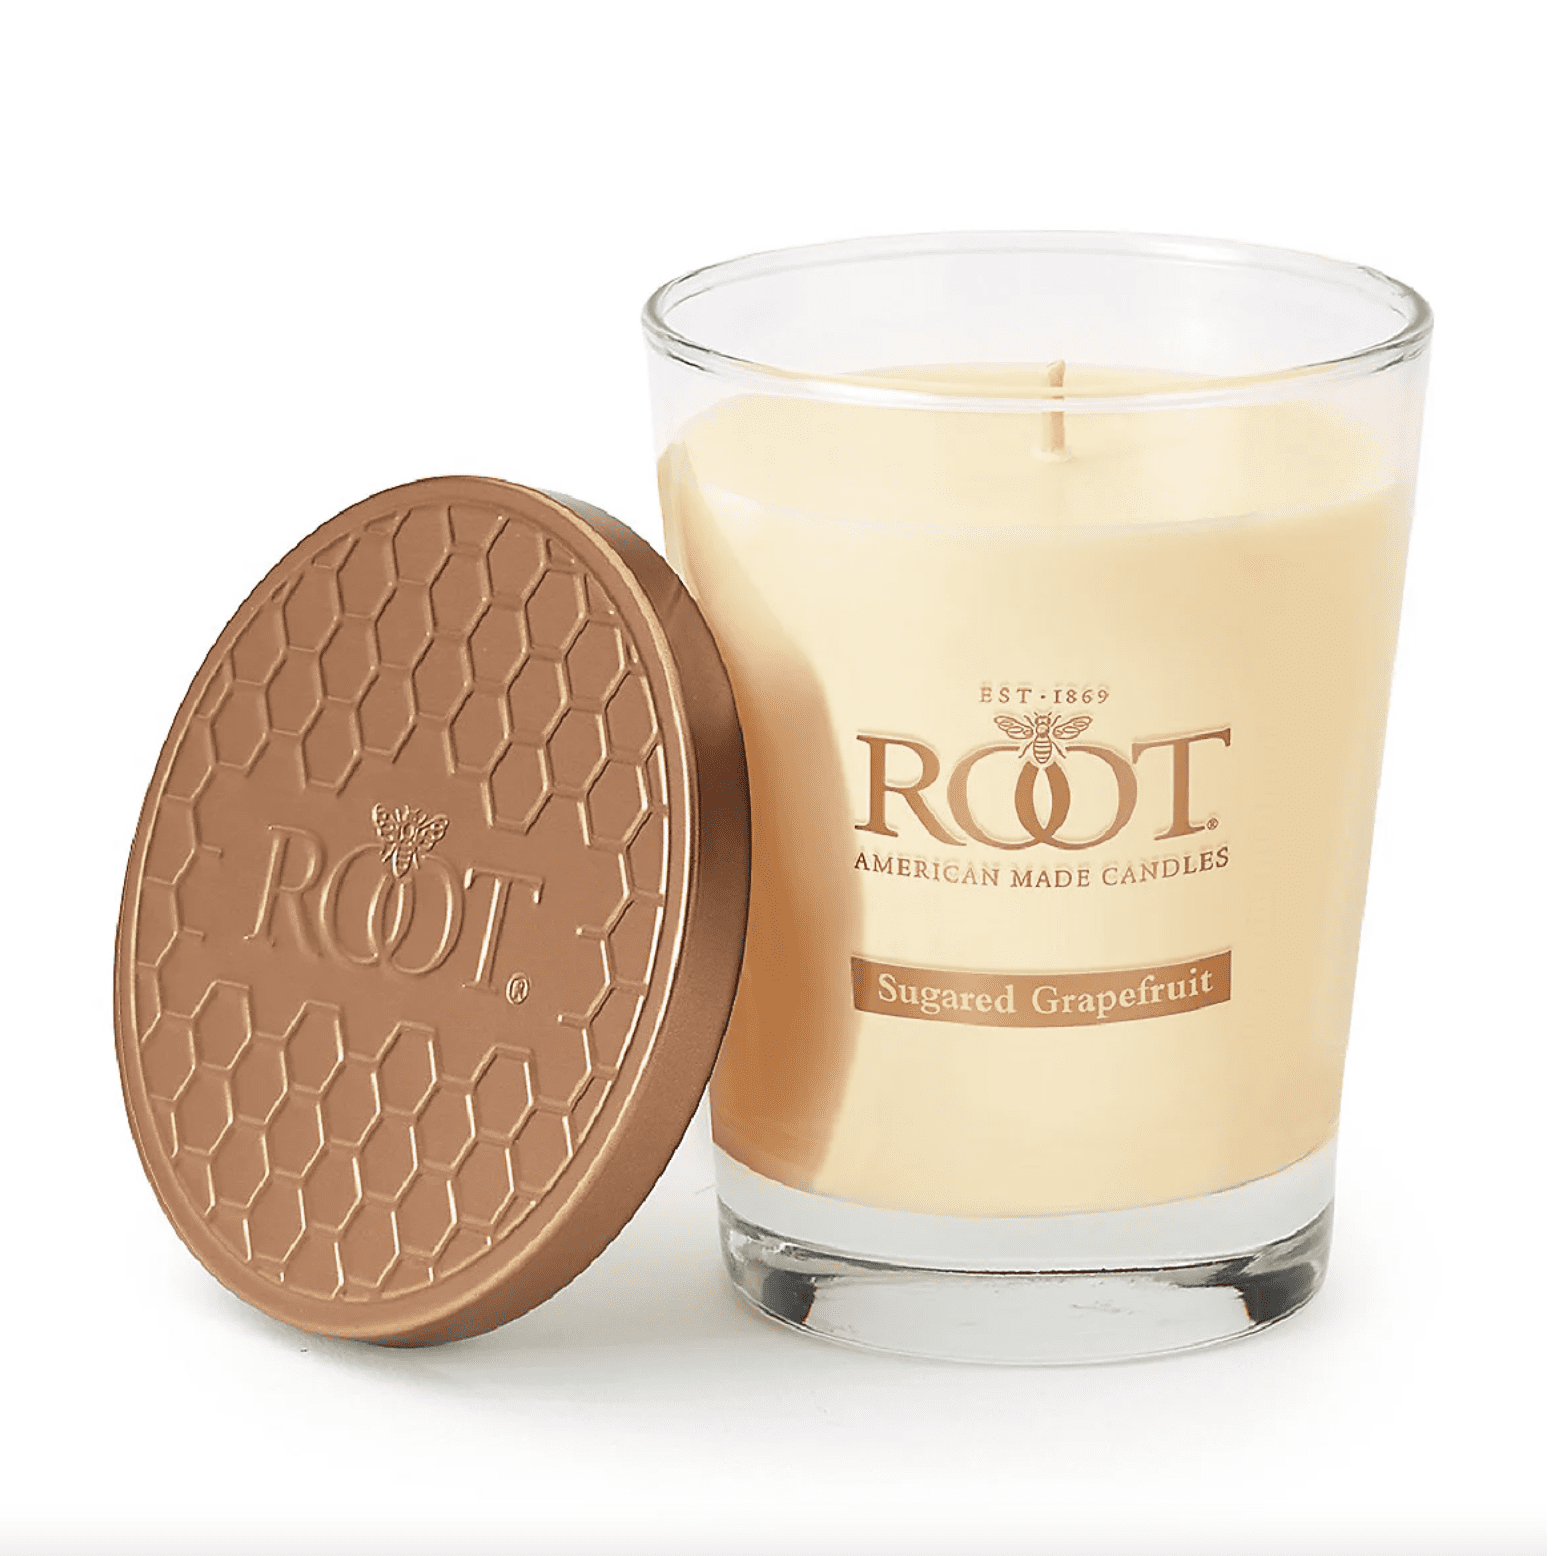 http://cdn.apartmenttherapy.info/image/upload/v1651188297/gen-workflow/product-database/root-sugared-grapefruit-candle-qvc.png